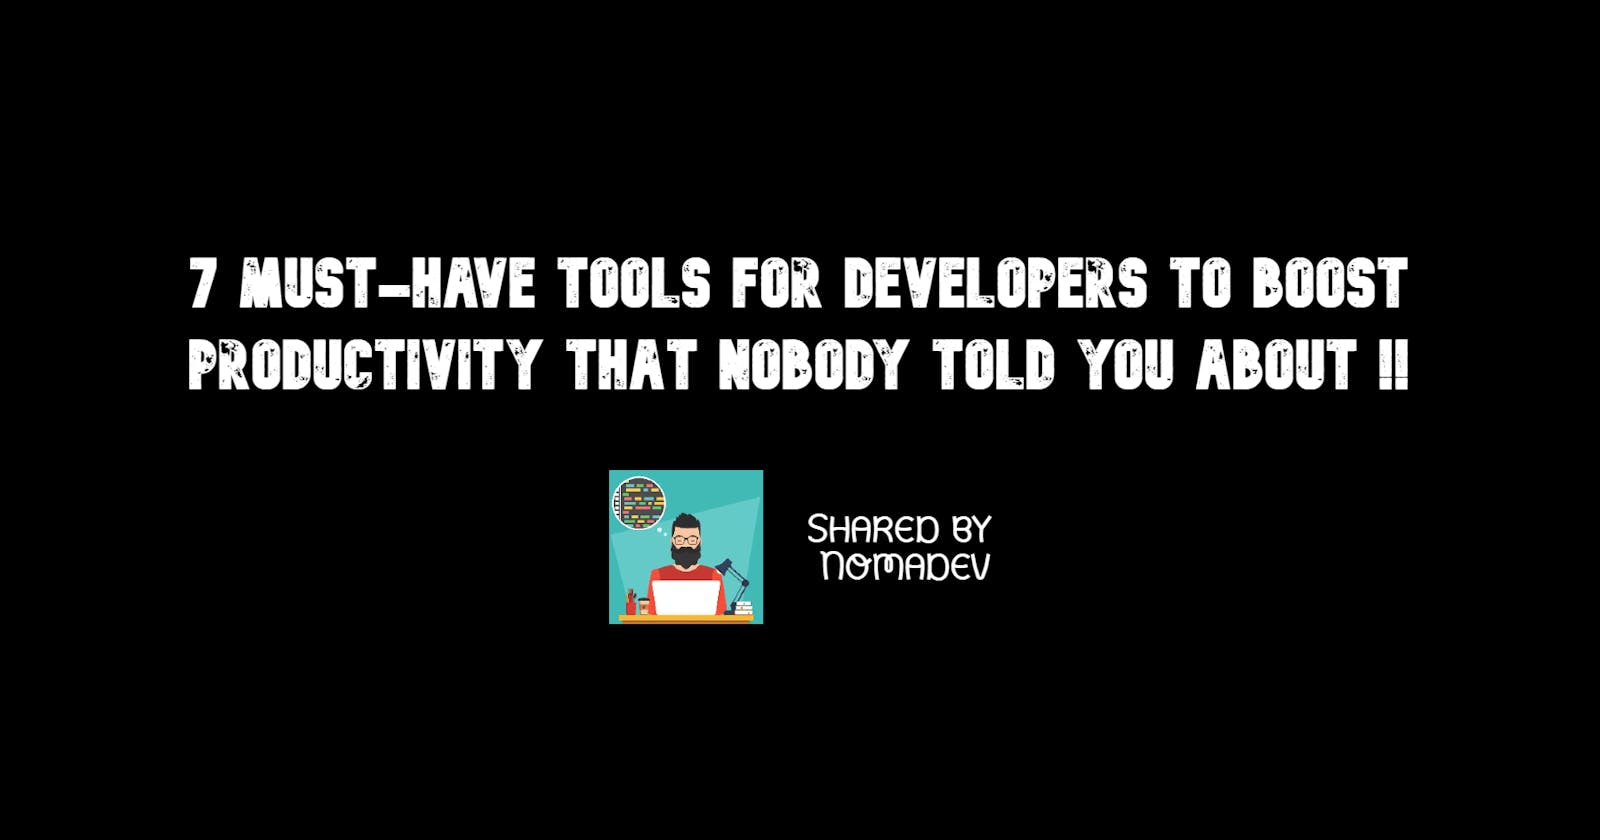 7 Must-Have Tools for Developers to Boost Productivity that nobody told you about !!